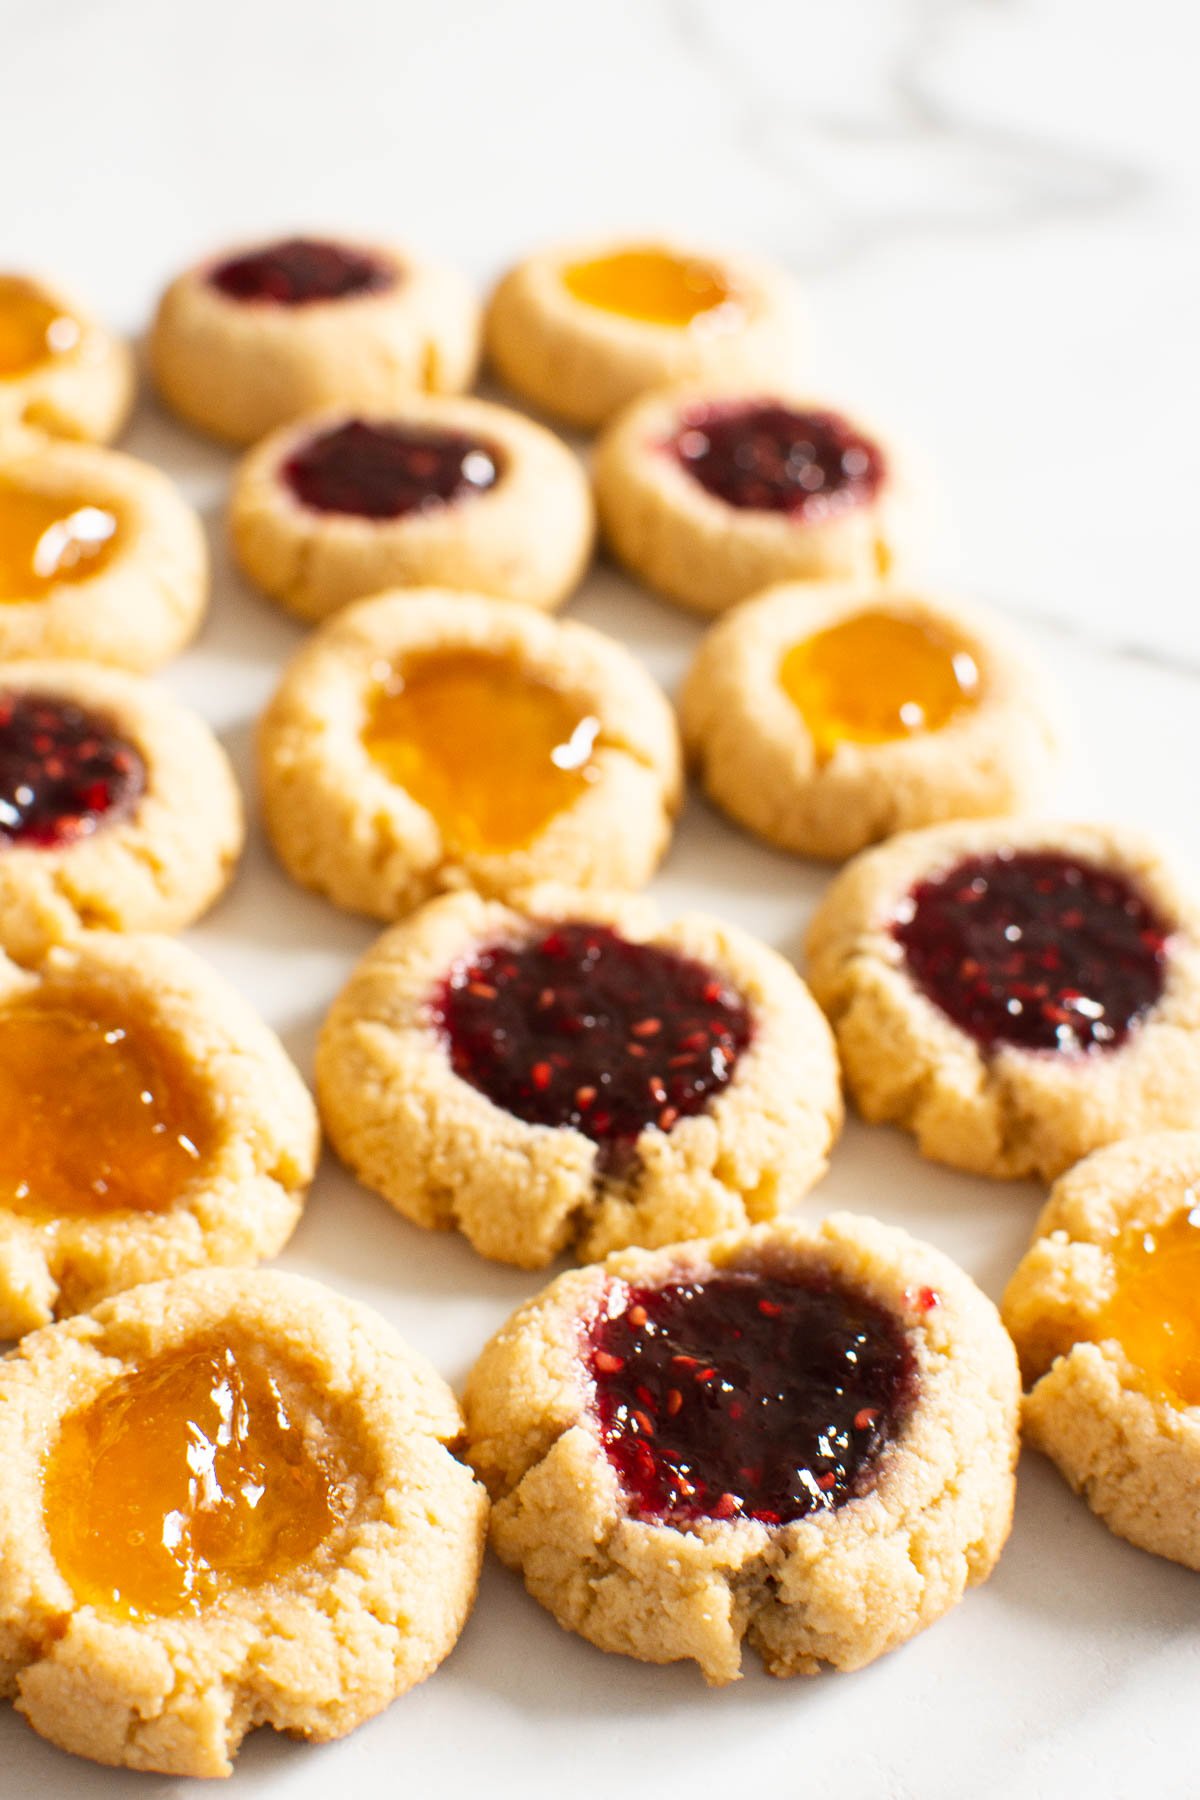 Almond flour thumbprint cookies filled with jam on surface.